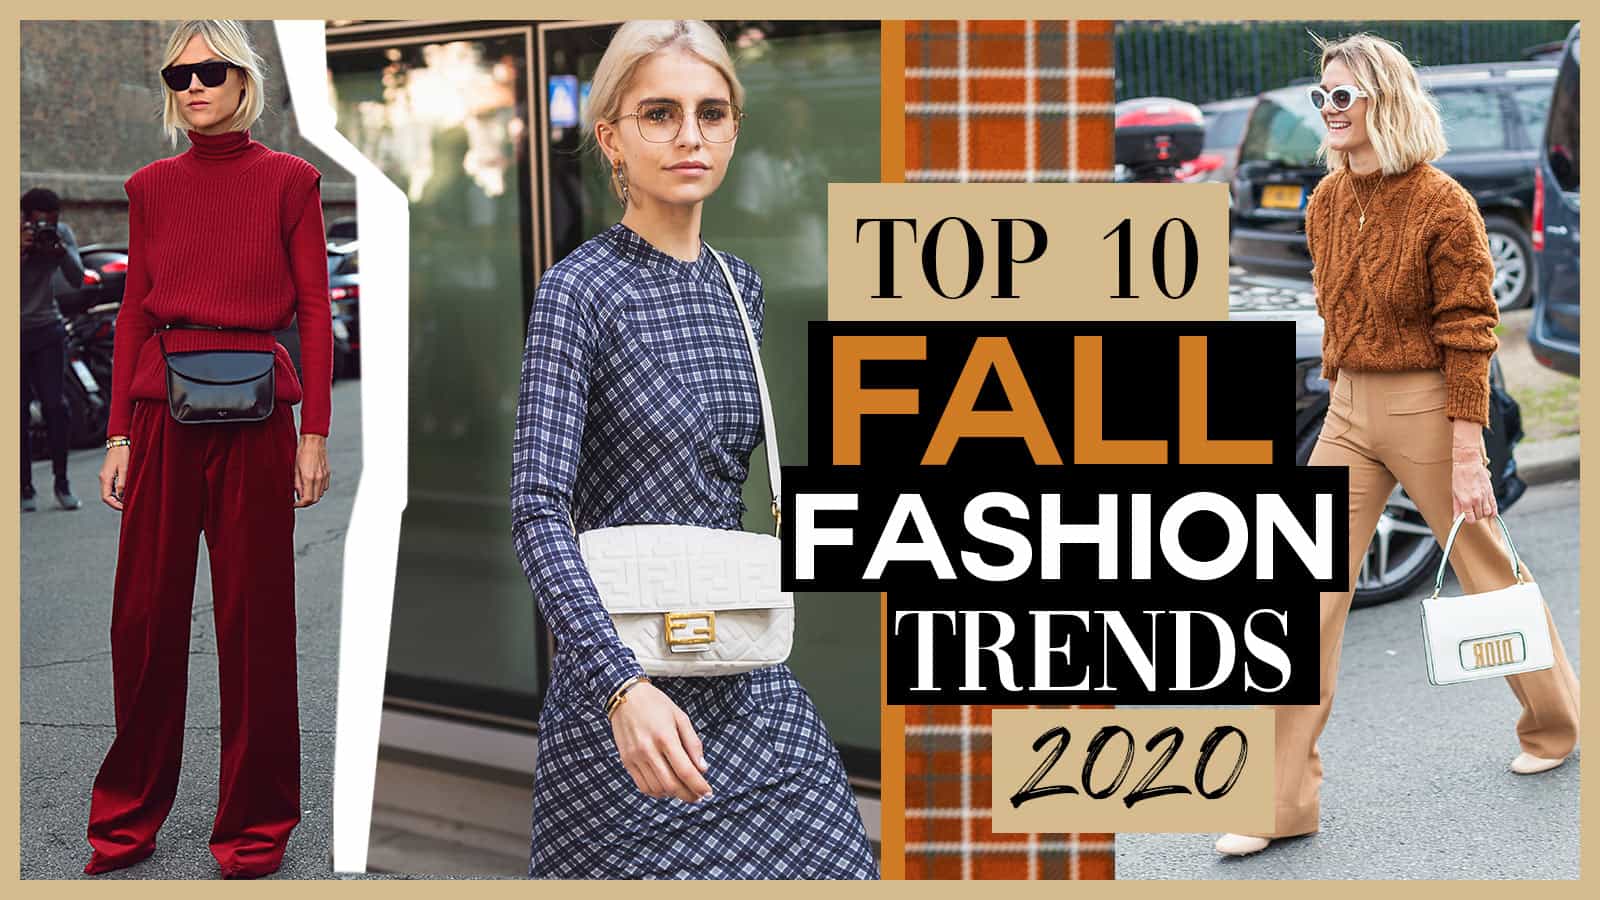 The TOP 10 Fall Fashion Trends 2020 that you need to try